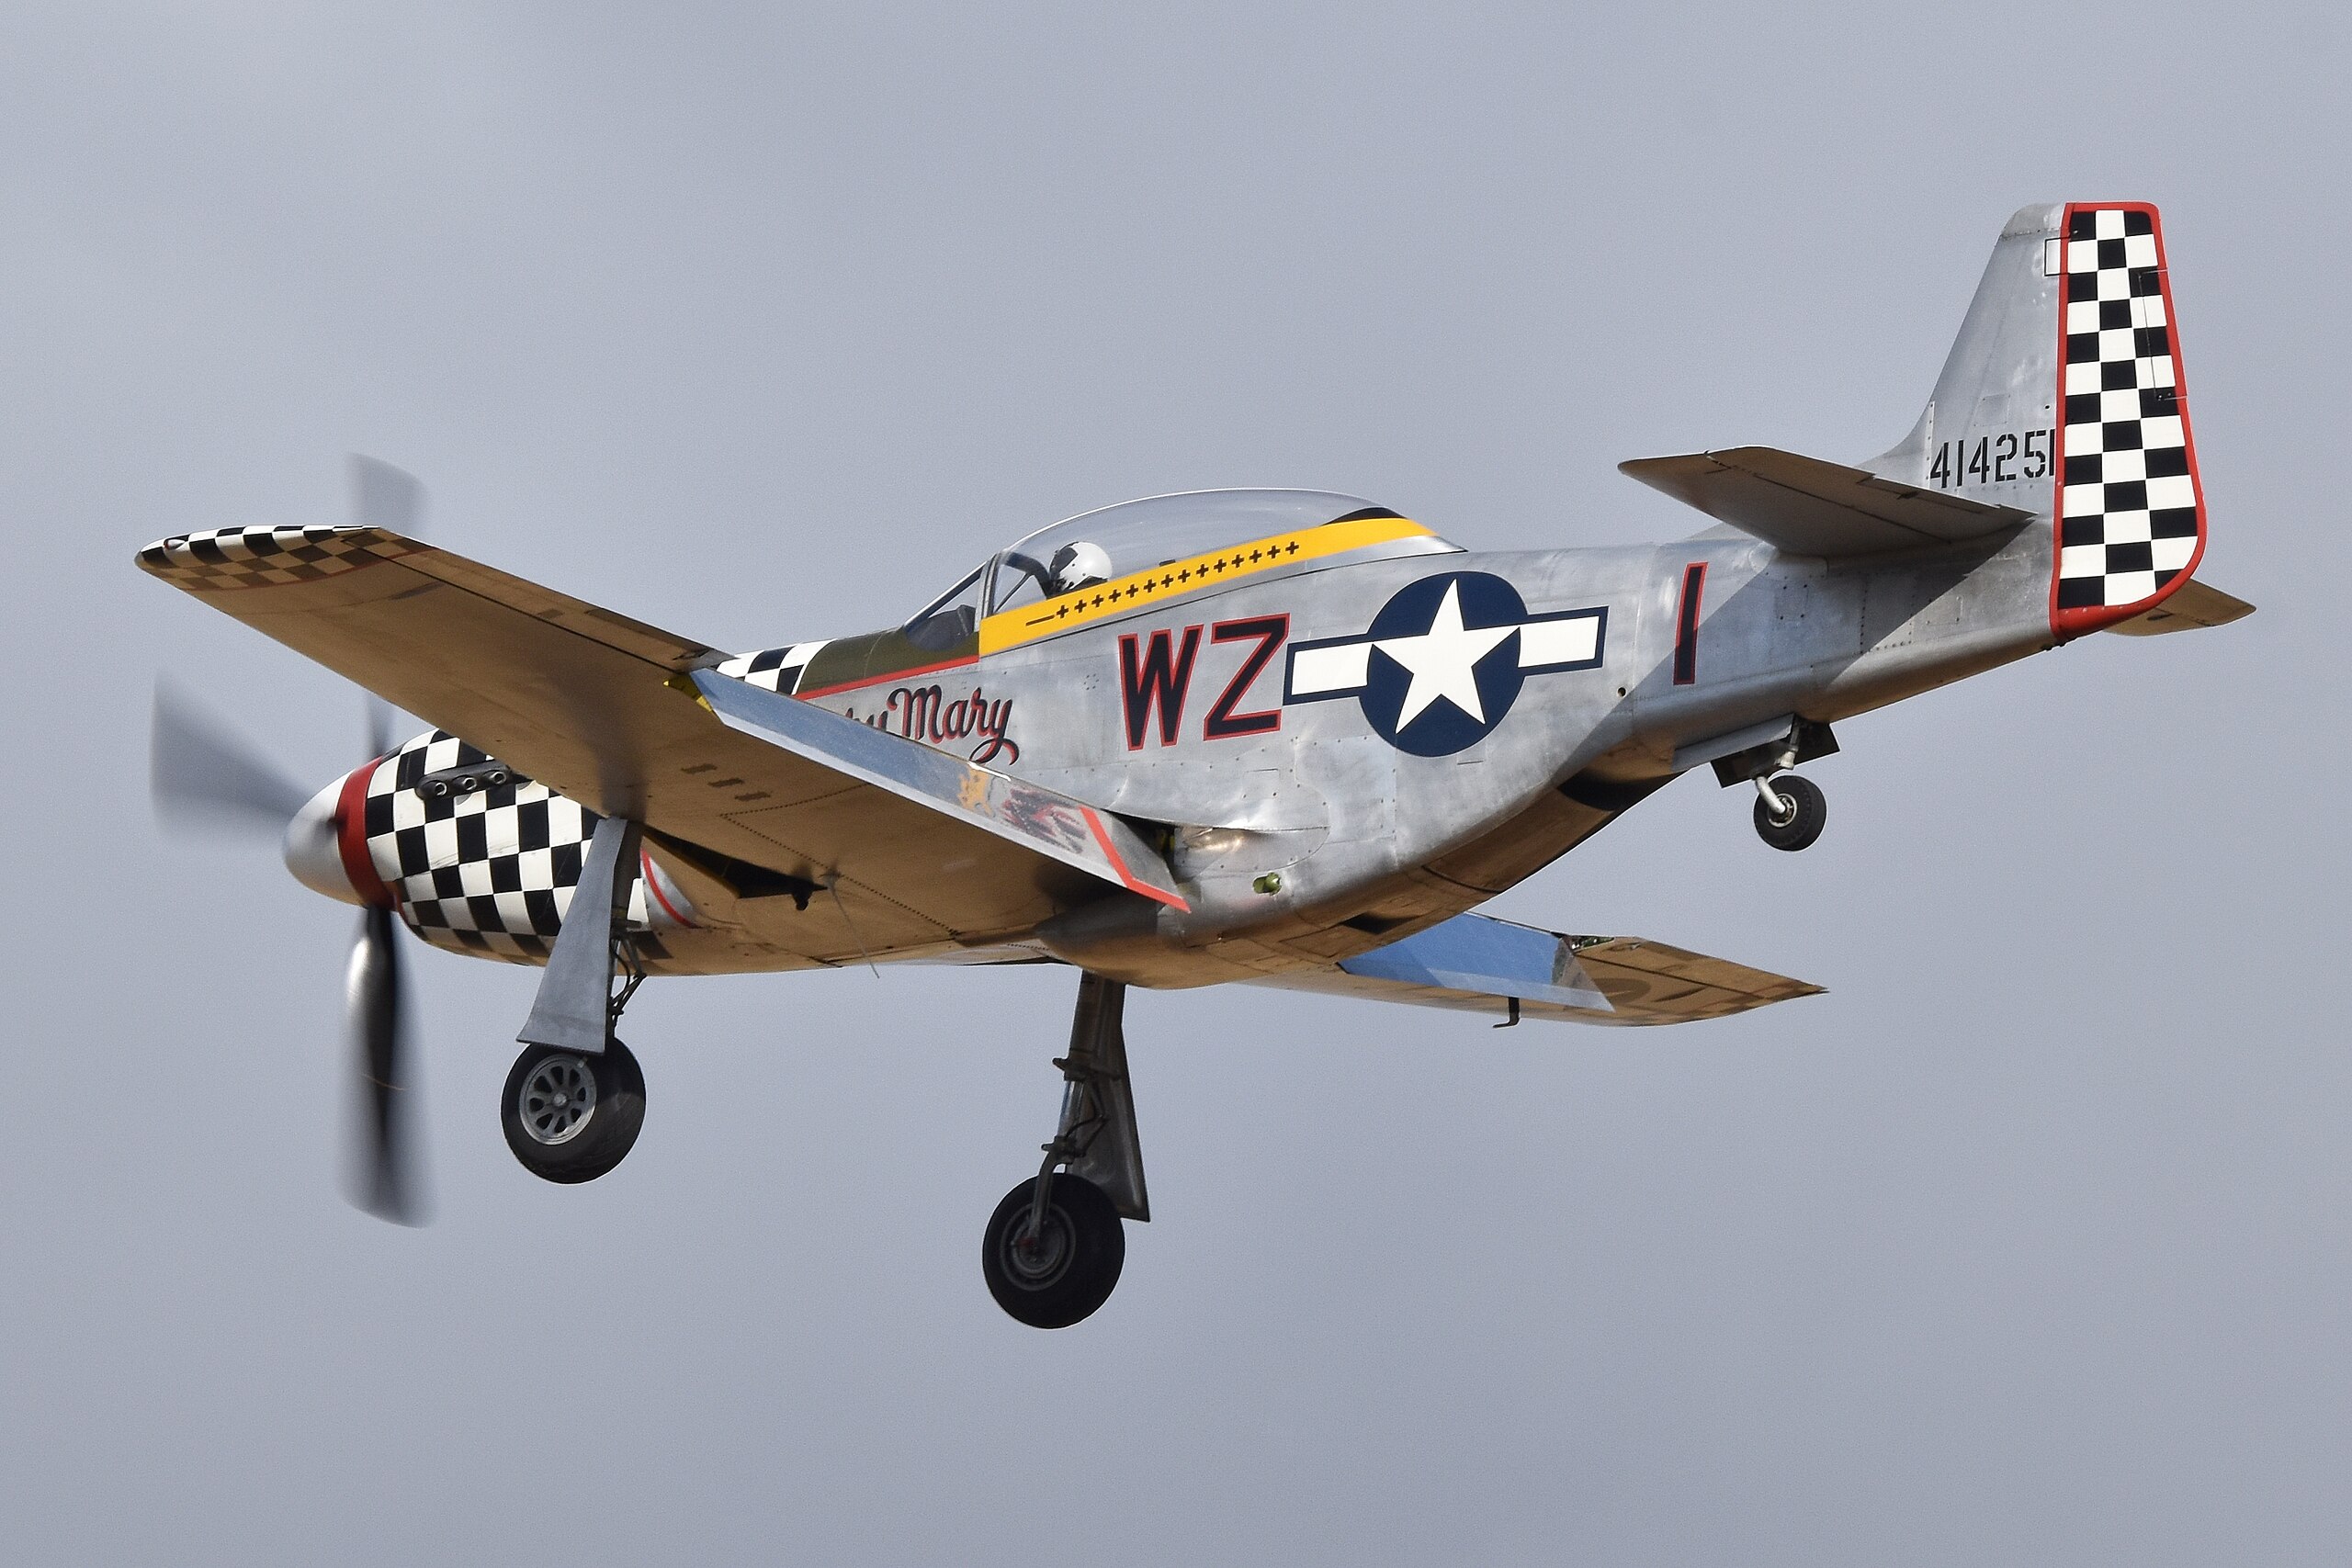 File:North American P-51D-25-NT Mustang '414251 - WZ-I' “Contrary 